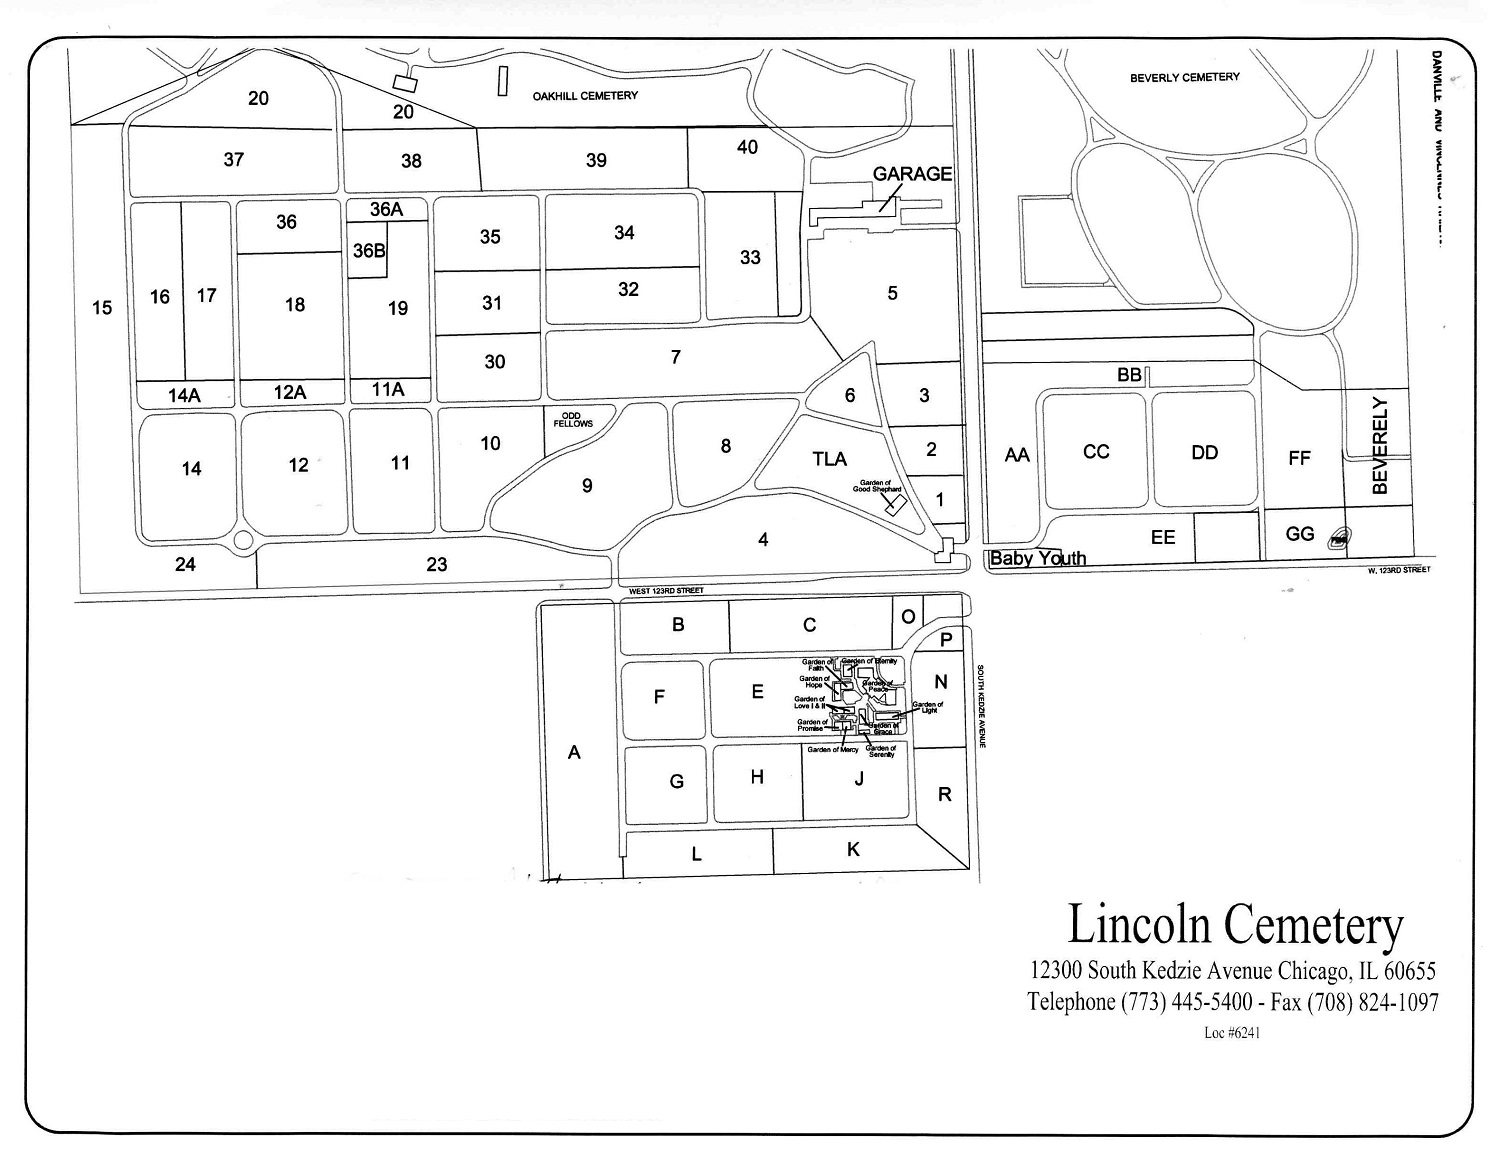 Cemetery map of Lincoln Cemetery in Blue Island Illinois